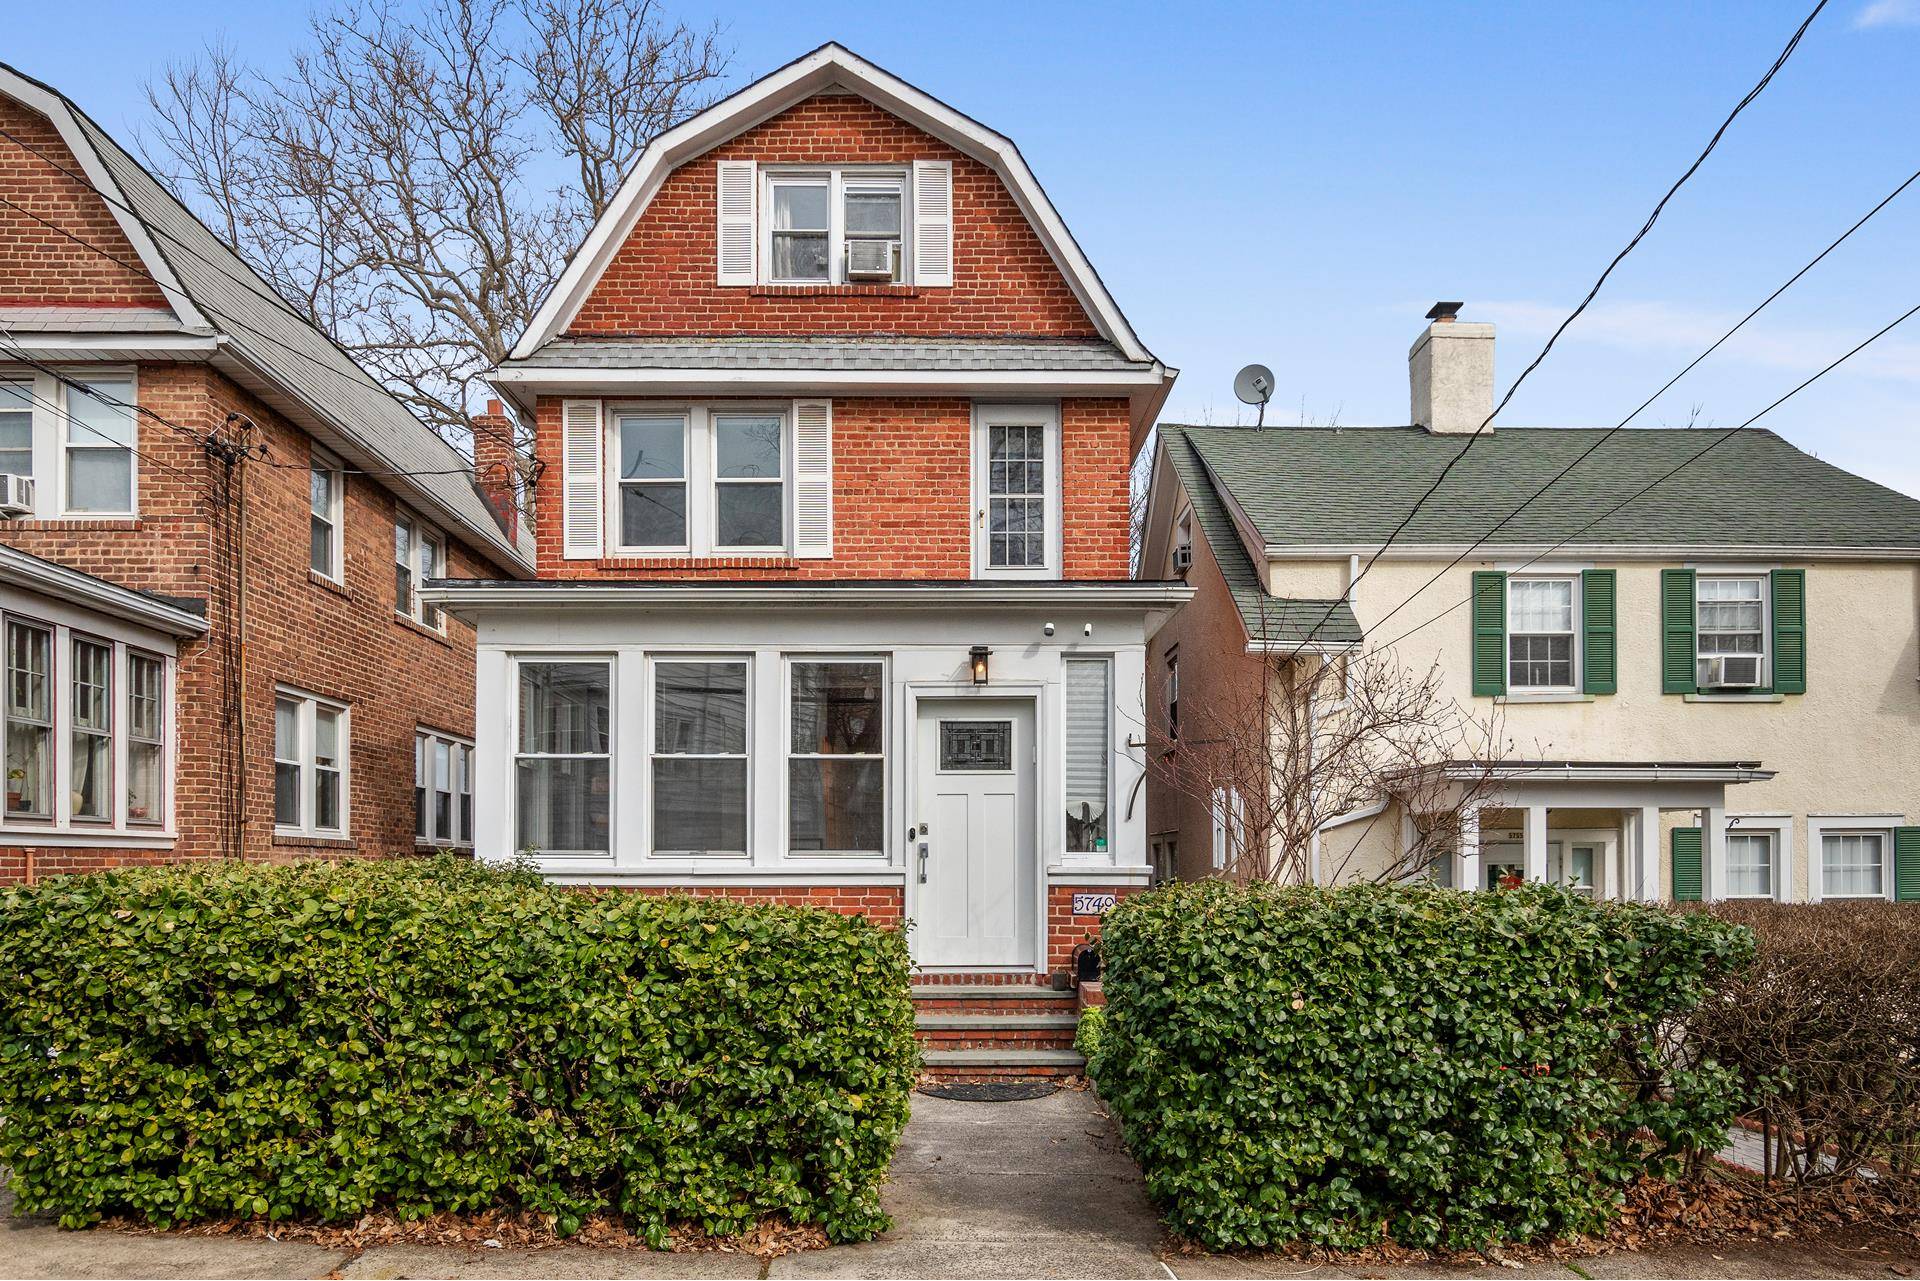 Built in the 1930's this beautiful brick home offers charm and character of past times, yet beautifully renovated and updated throughout.